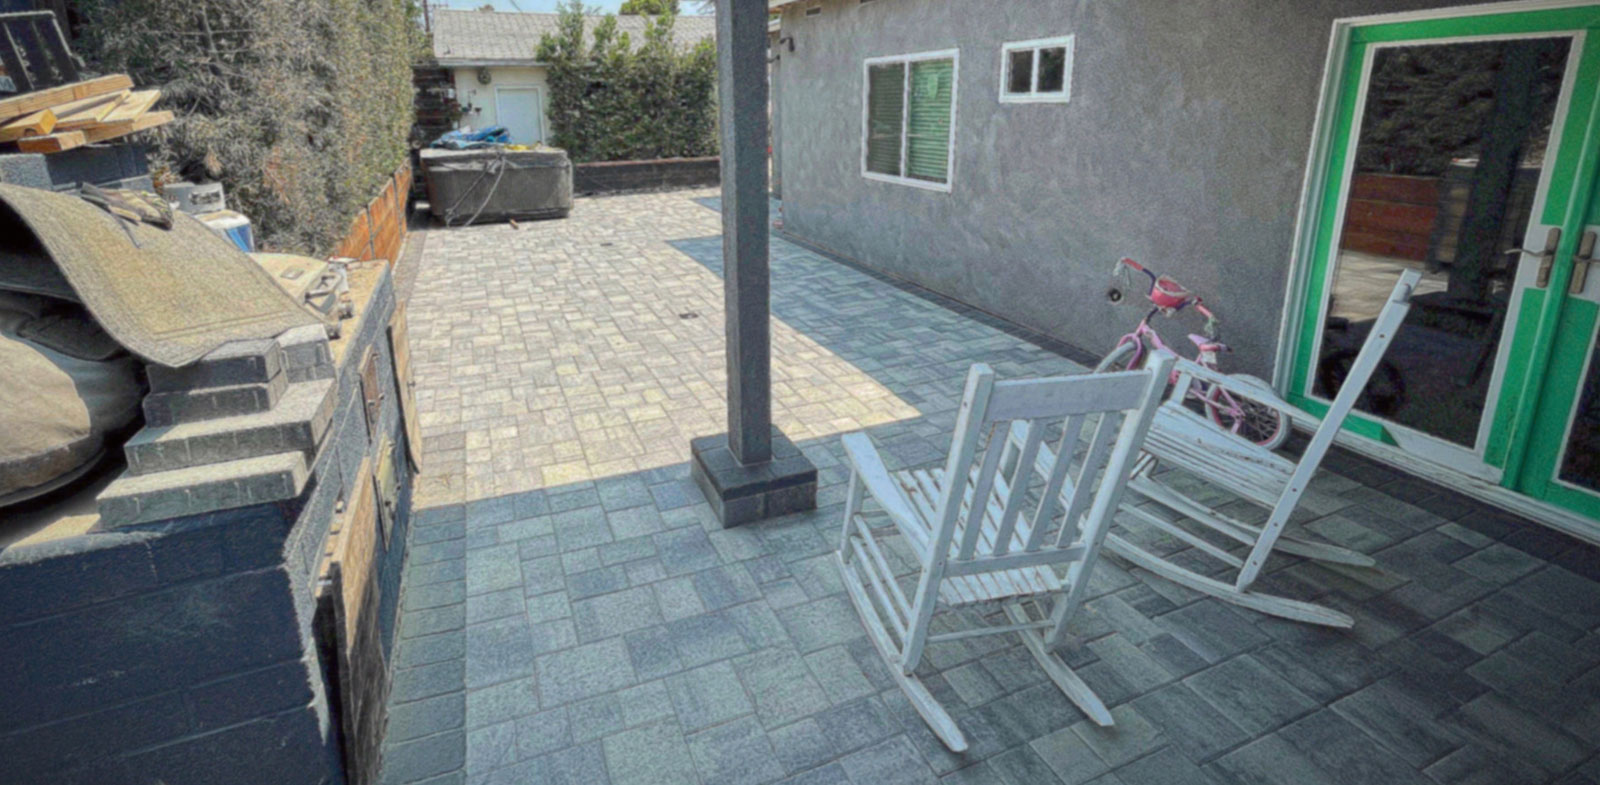 Patio_after_1